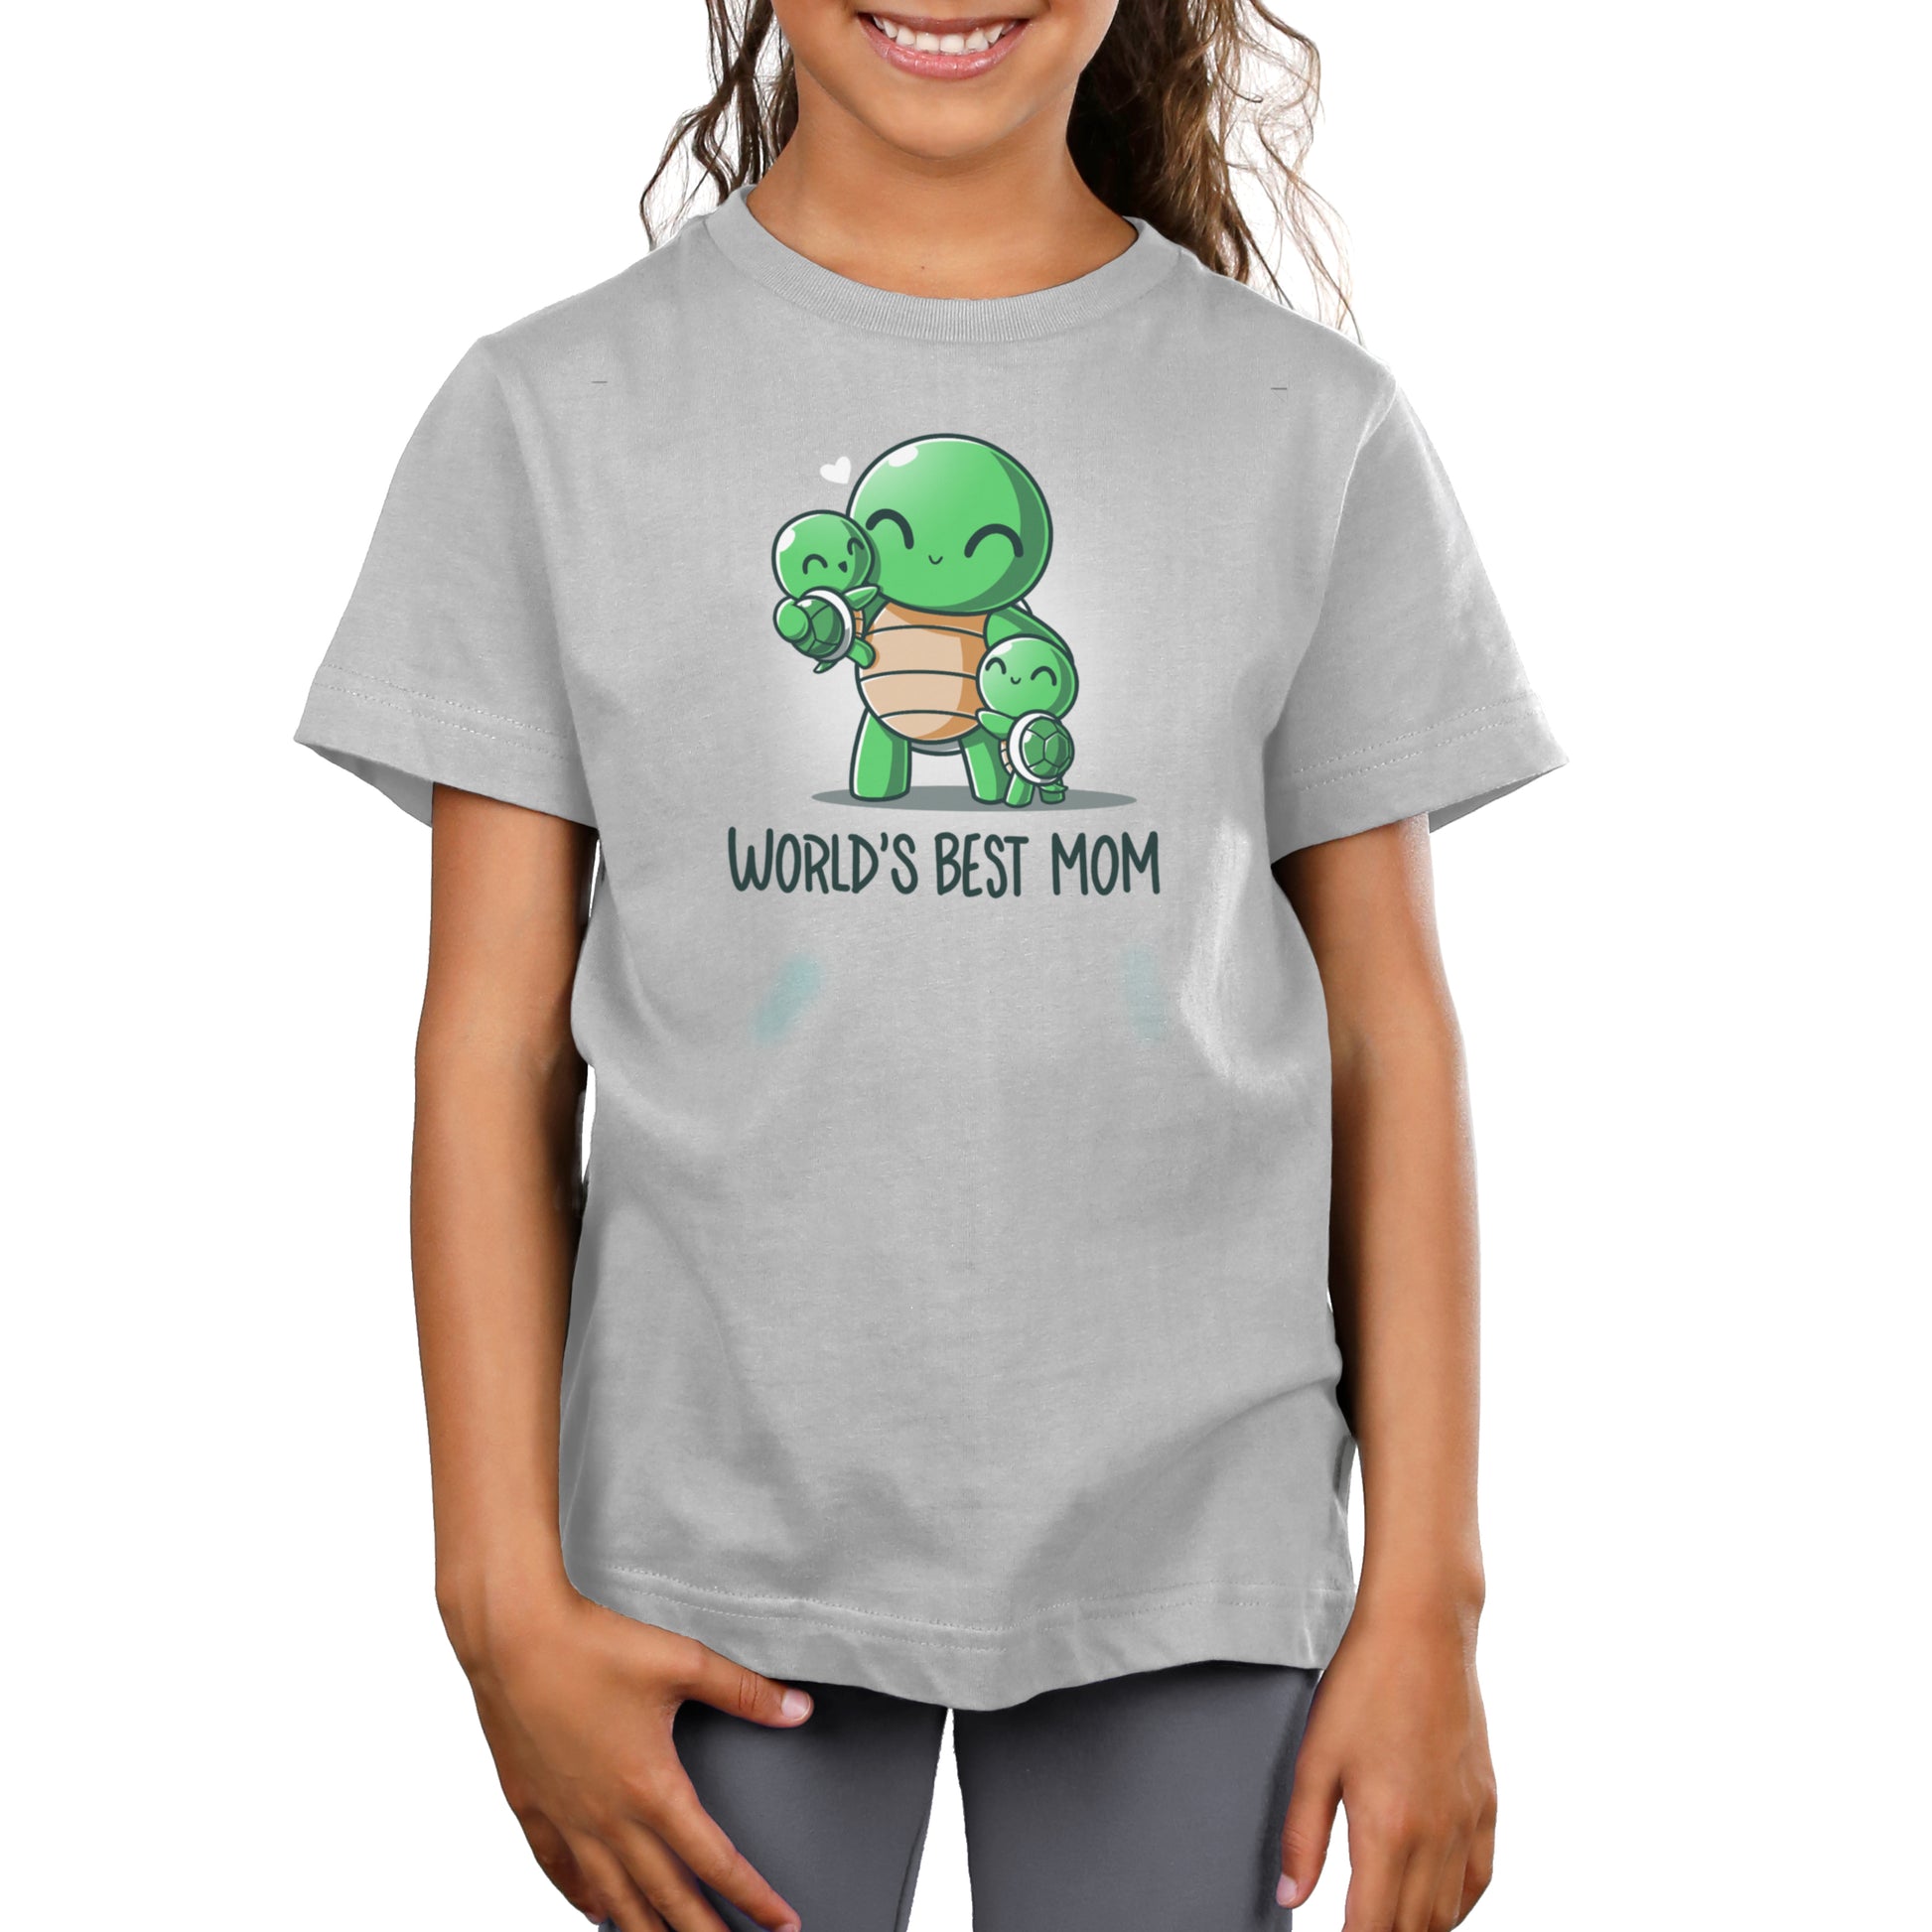 Premium Cotton T-shirt - A girl wearing a grey monsterdigital World's Best Mom apparel featuring a cartoon turtle family and the text "WORLD'S BEST MOM." This super soft ringspun cotton unisex apparelensures comfort while celebrating awesome moms.